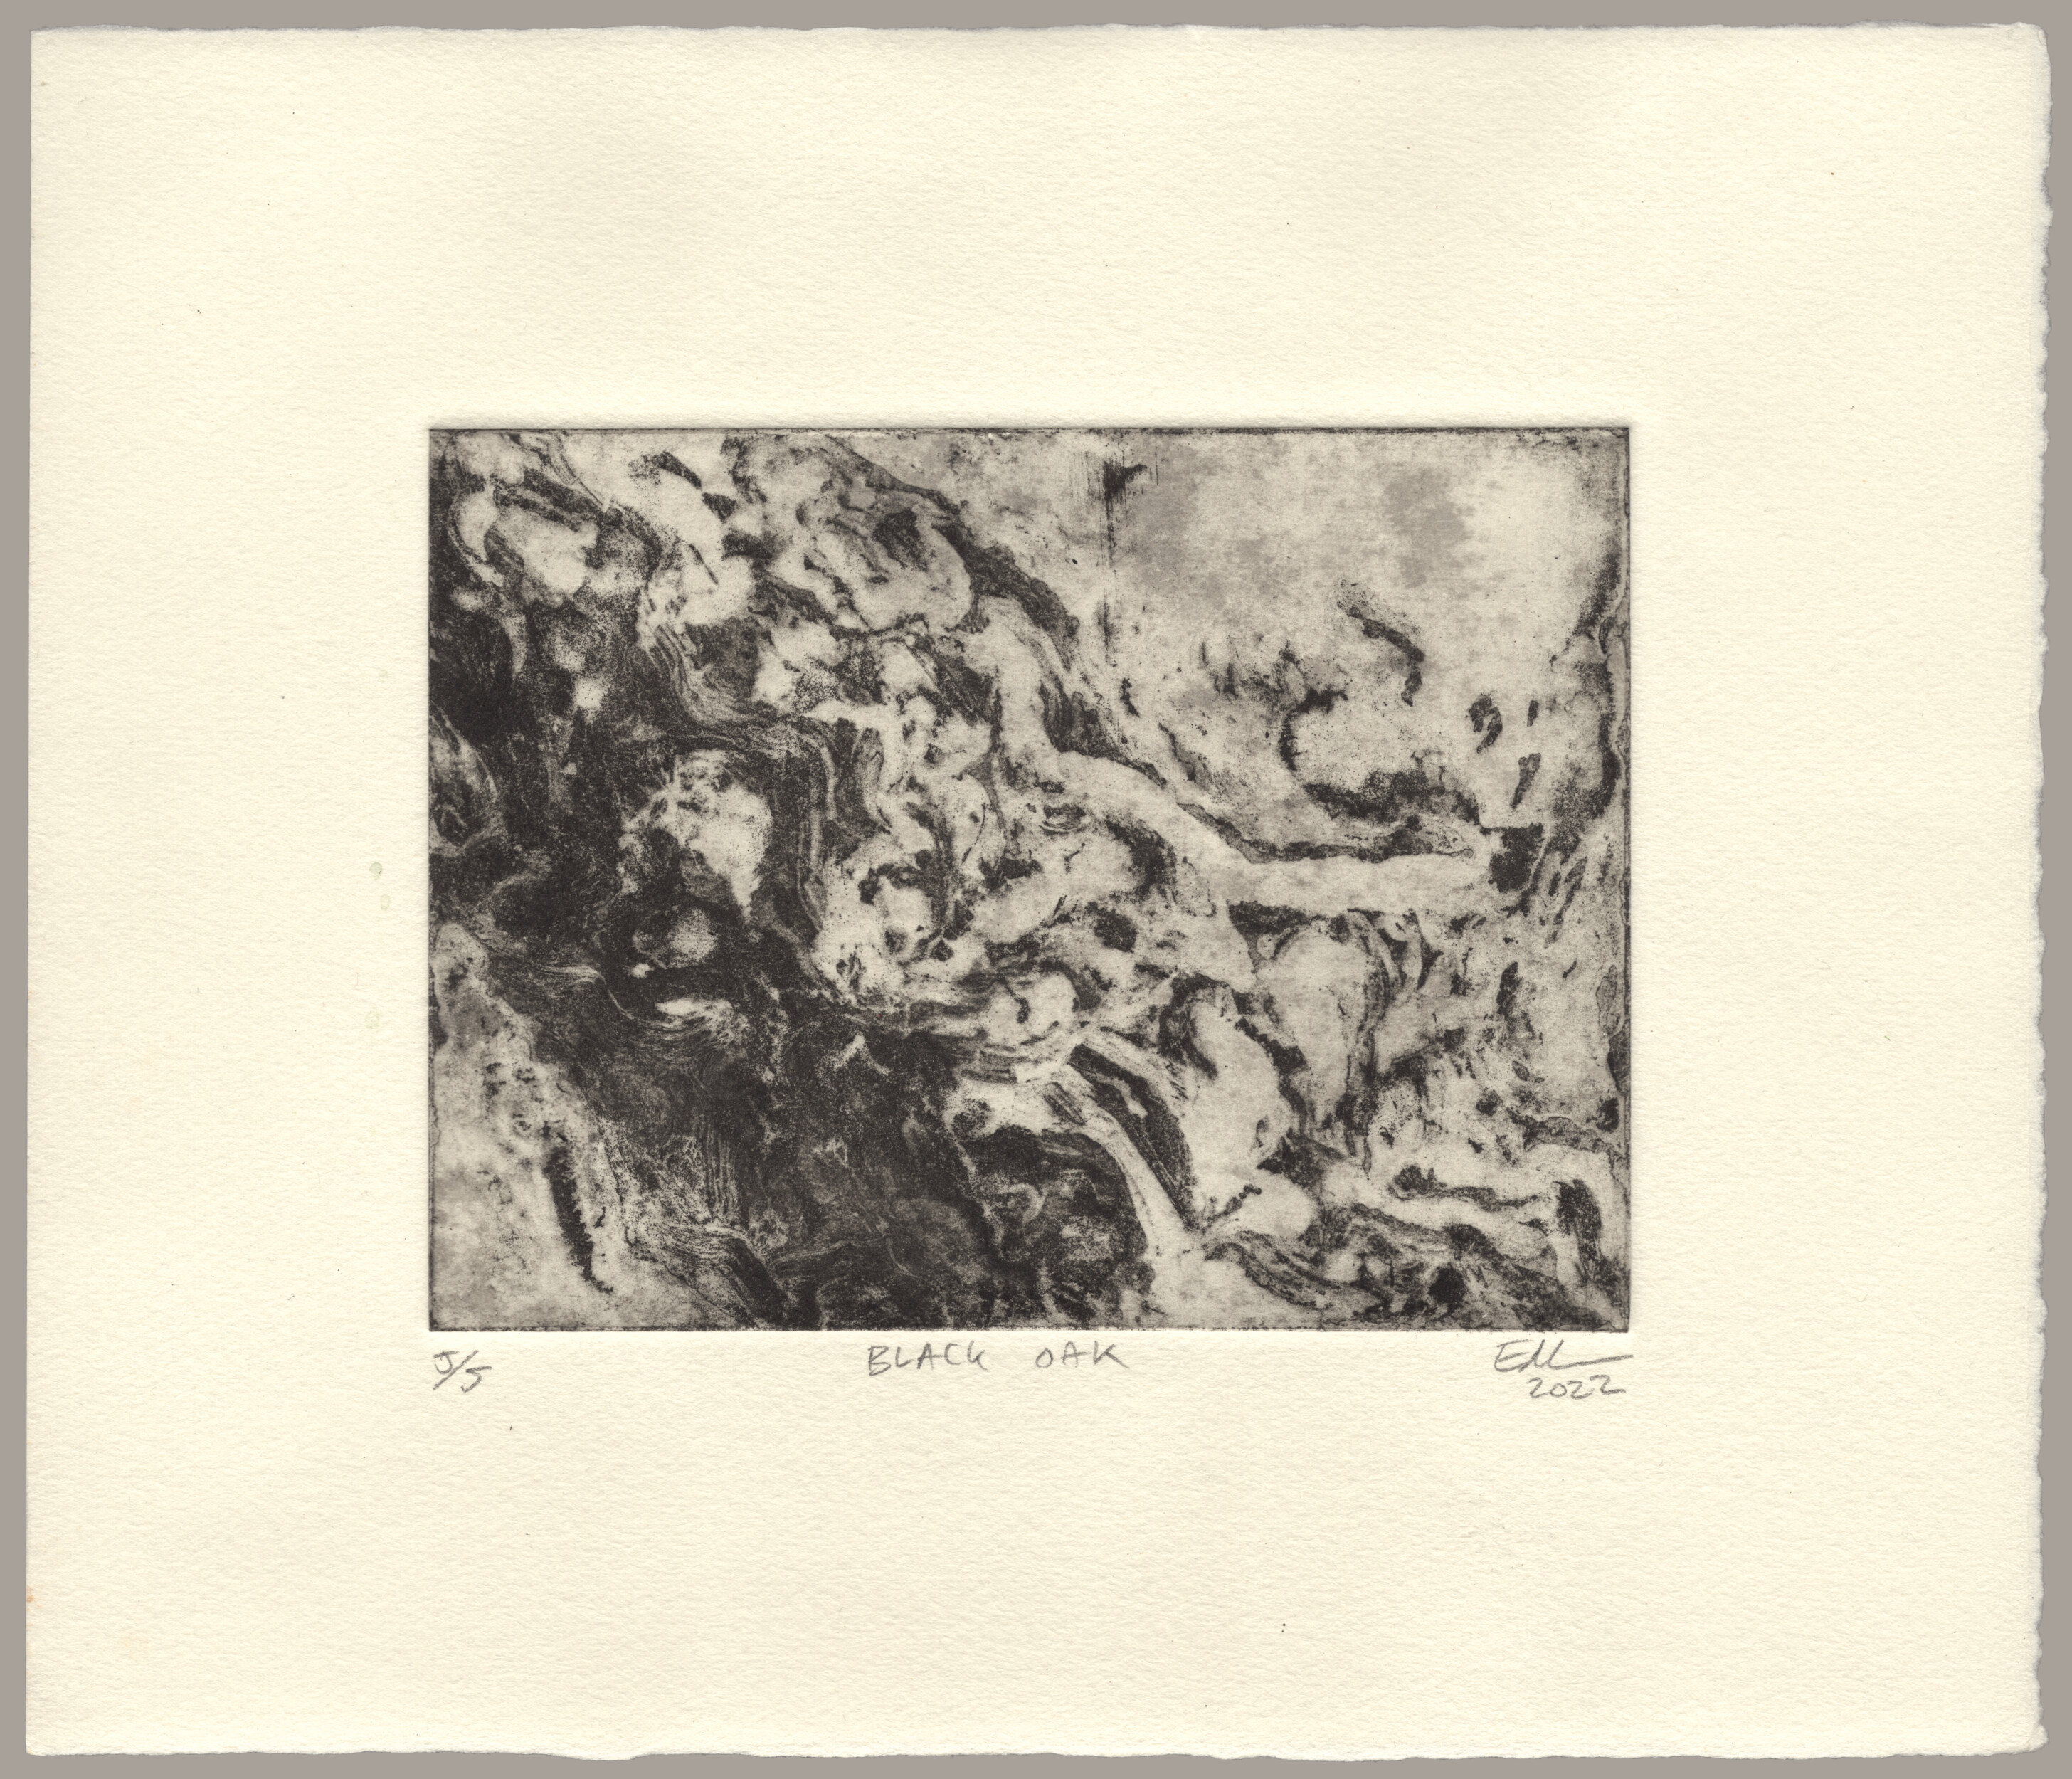 An abstract etching of tree bark in shades of warm grey and black on white paper. A band of irregular, dark brushstrokes crosses the paper diagonally from the upper left corner to the bottom right corner. The markings evoke the texture of tree bark, ice breaking away from the shore, or clouds of smoke from a forest fire. From the bottom left corner to the upper right corner, the markings transition from dense and black to sparse against the blotchy light grey background, suggesting curvature. The print is signed: '5 of 5, Black Oak, EM 2022'